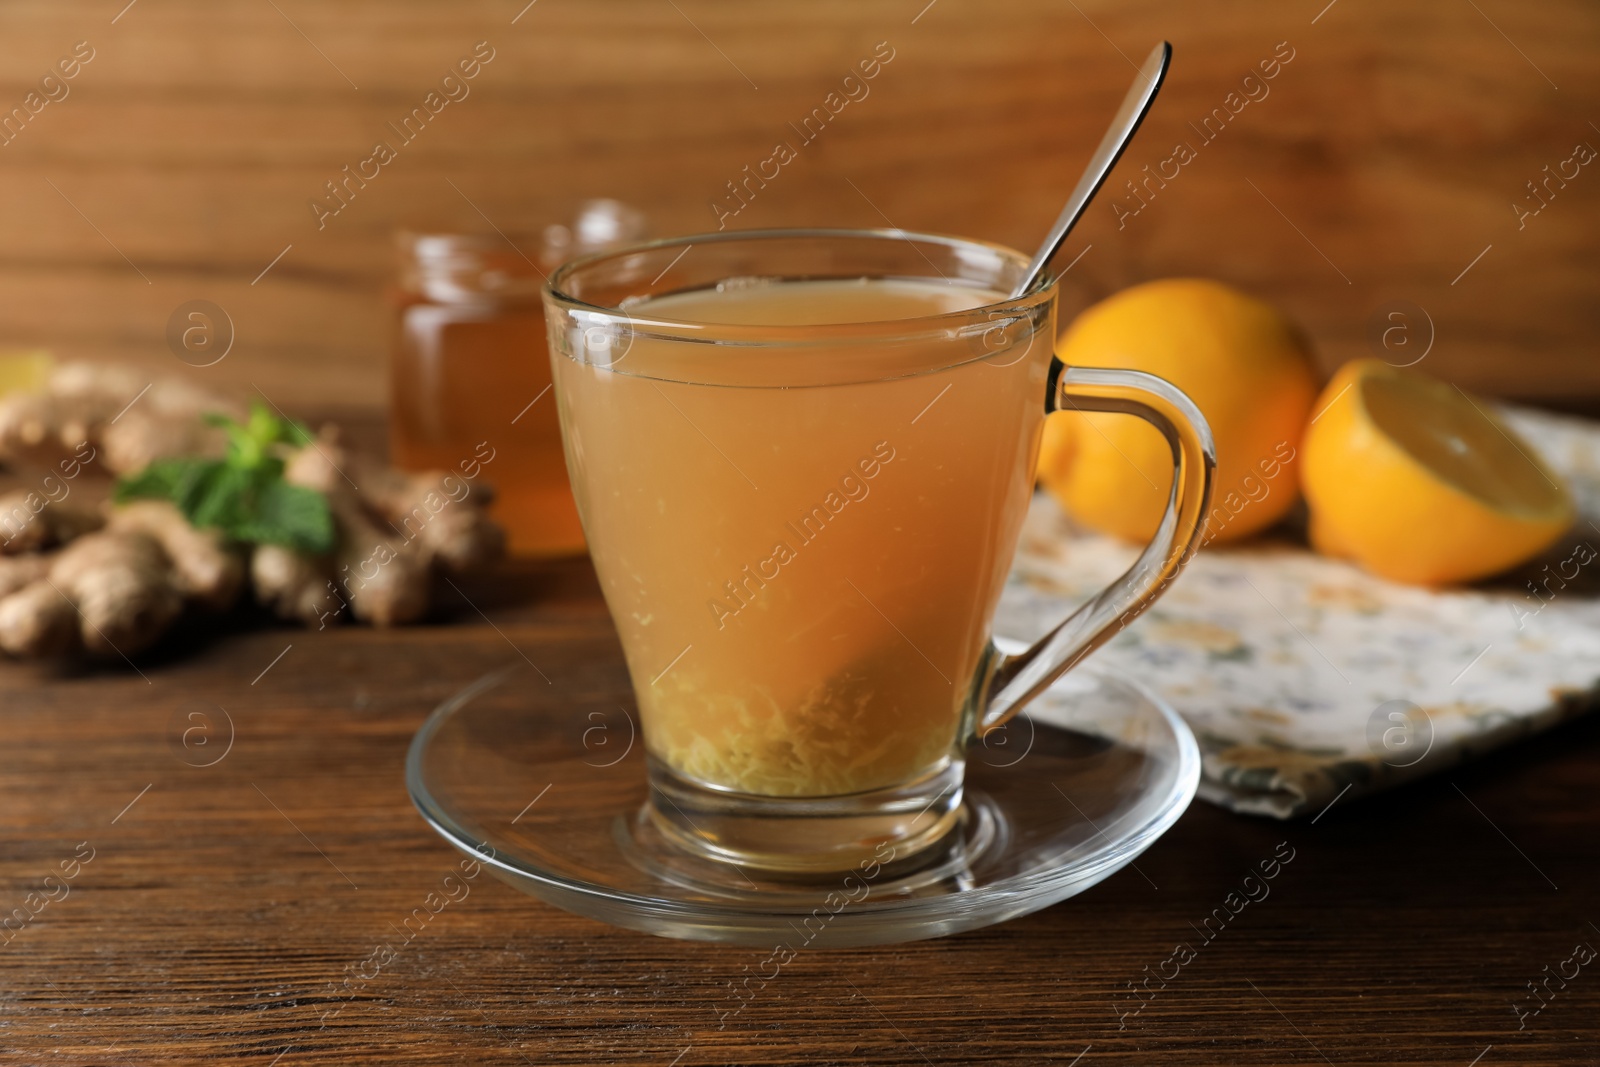 Photo of Cup of delicious ginger tea and ingredients on wooden table